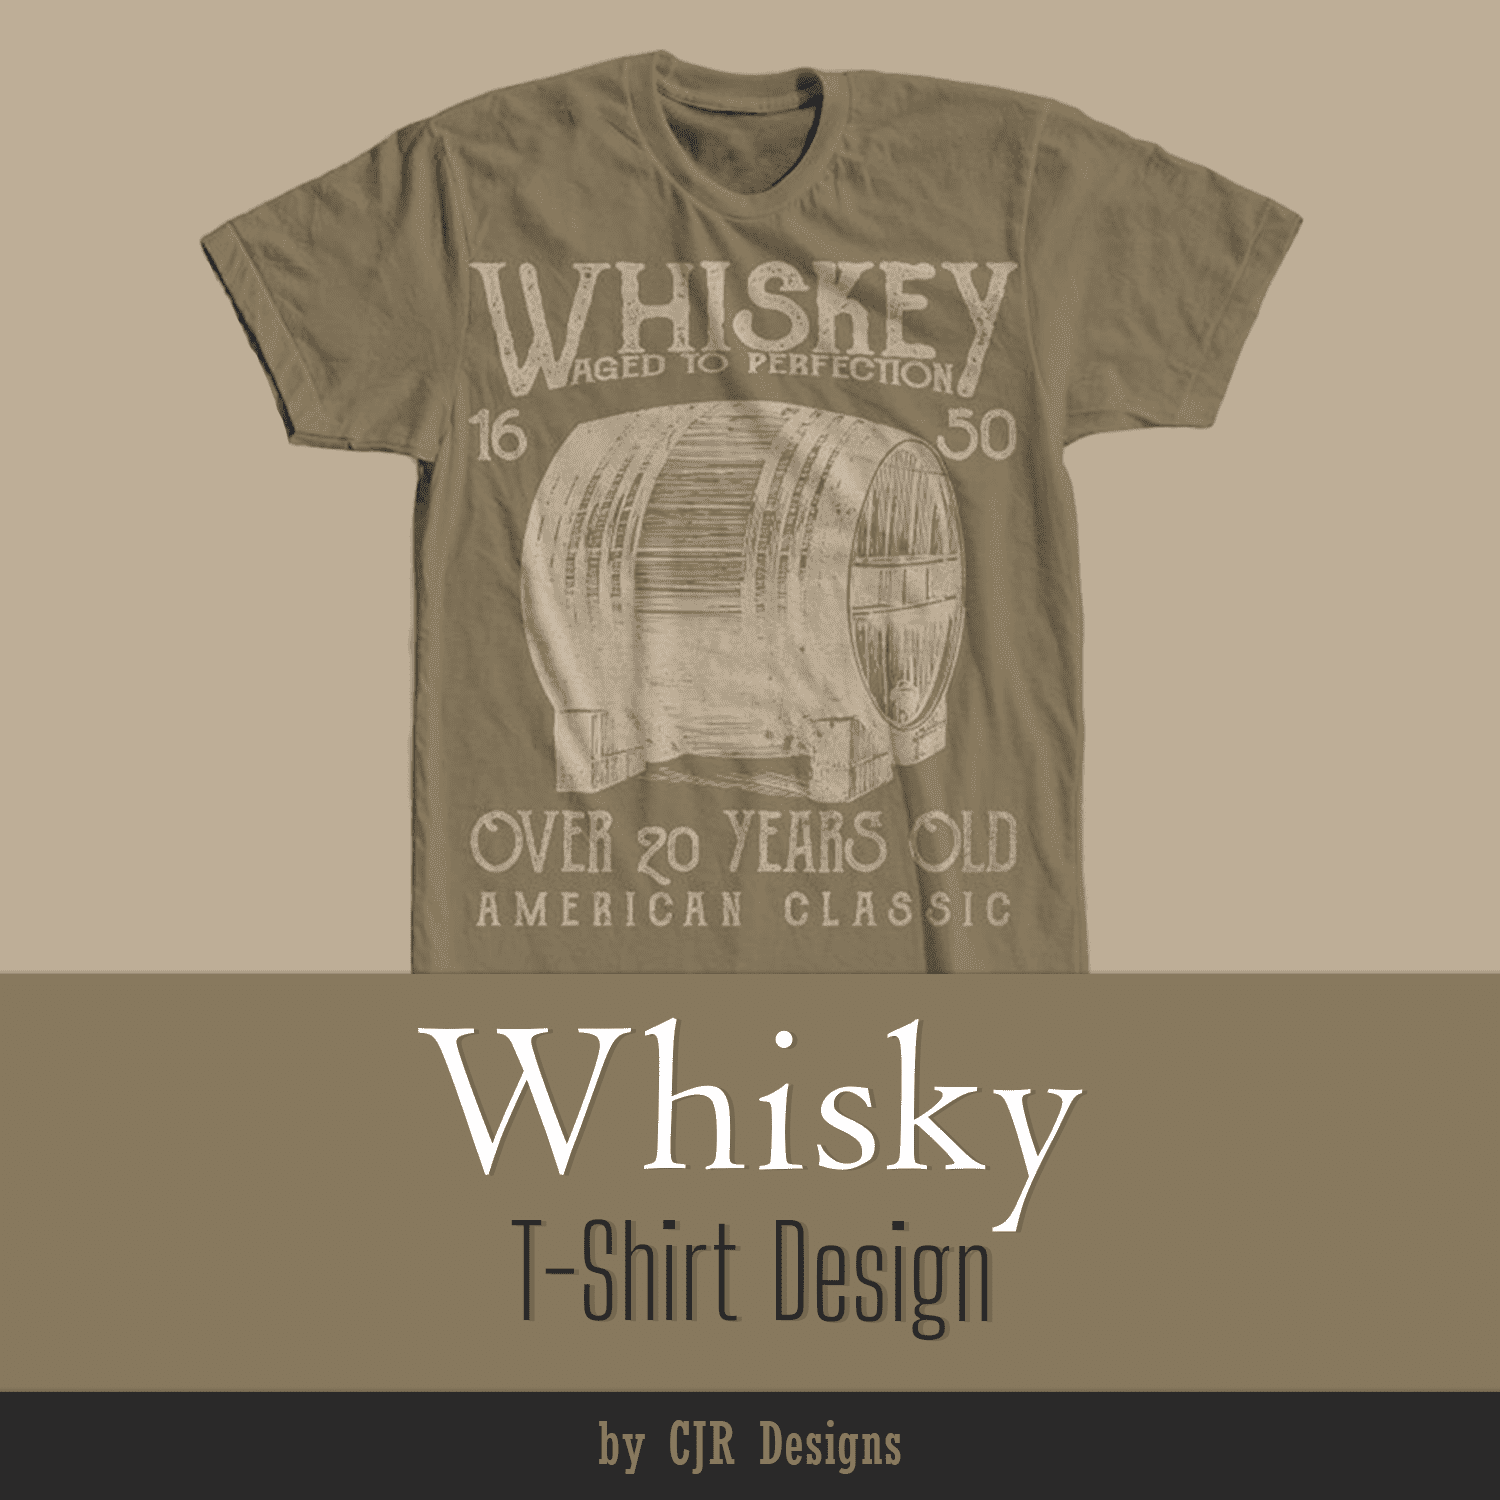 Beige t-shirt with beautiful print with whiskey barrel and slogan.